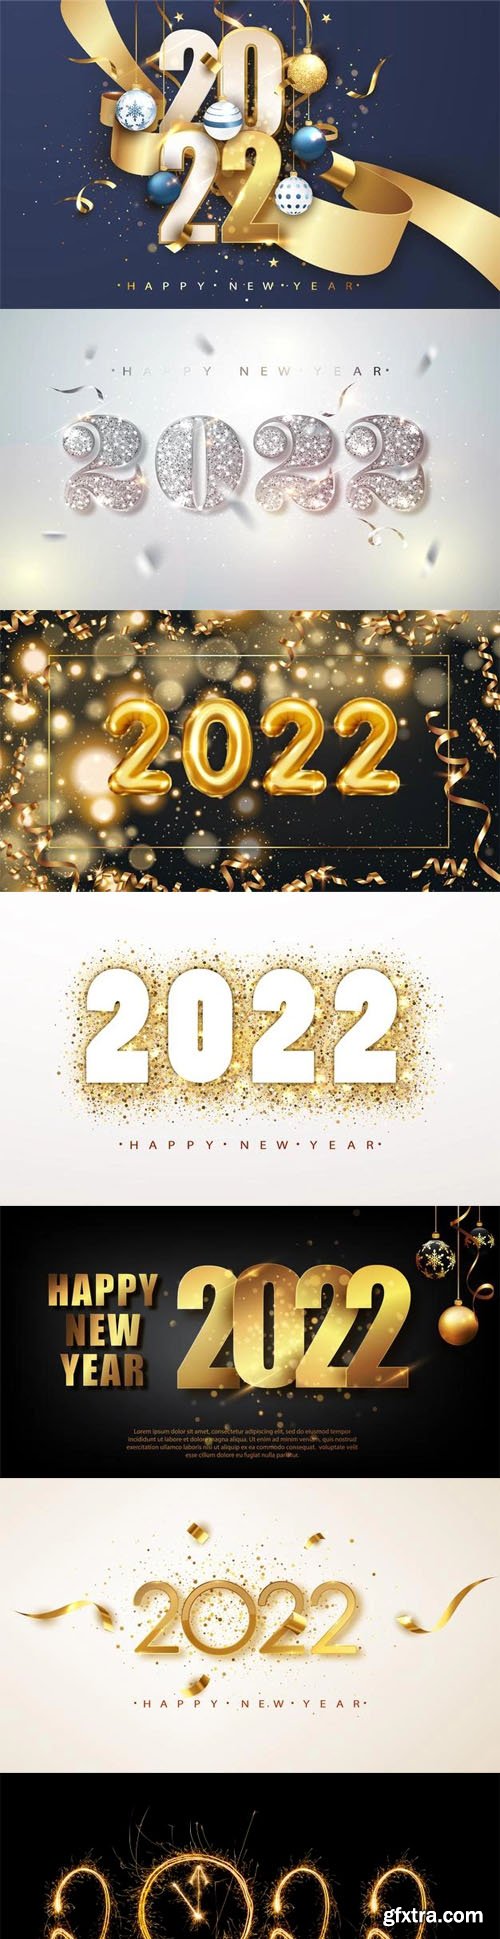 Happy New Year 2022 Banners & Backgrounds Vector Templates